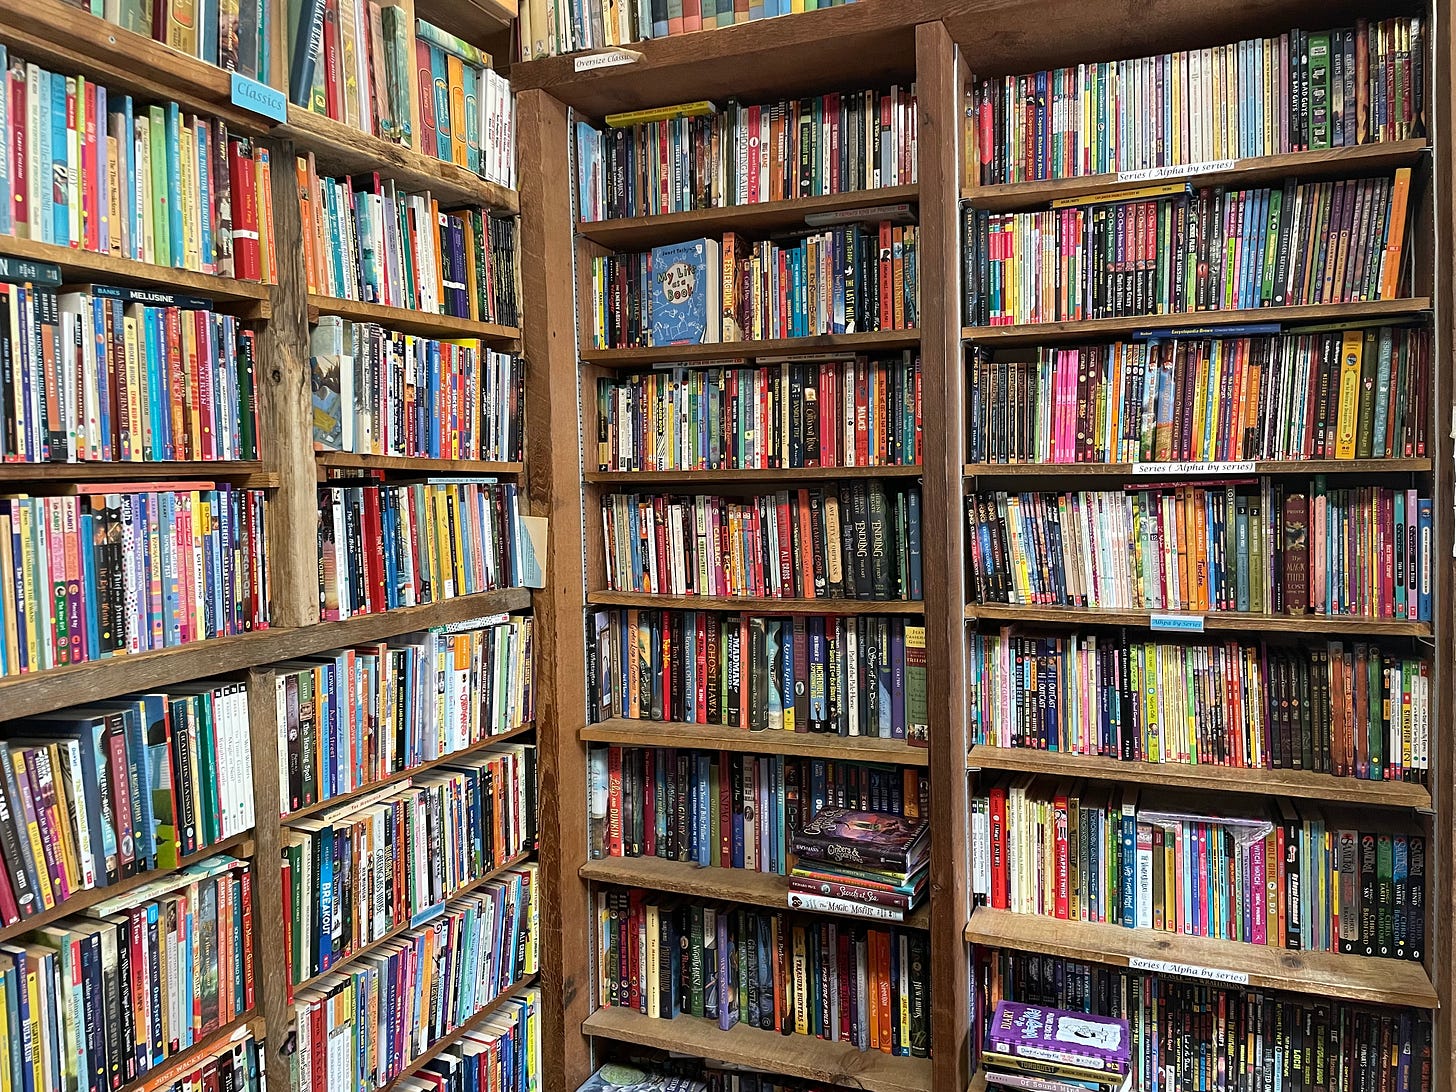 Shelves of a bookstore, with titles organized on them from top to bottom.